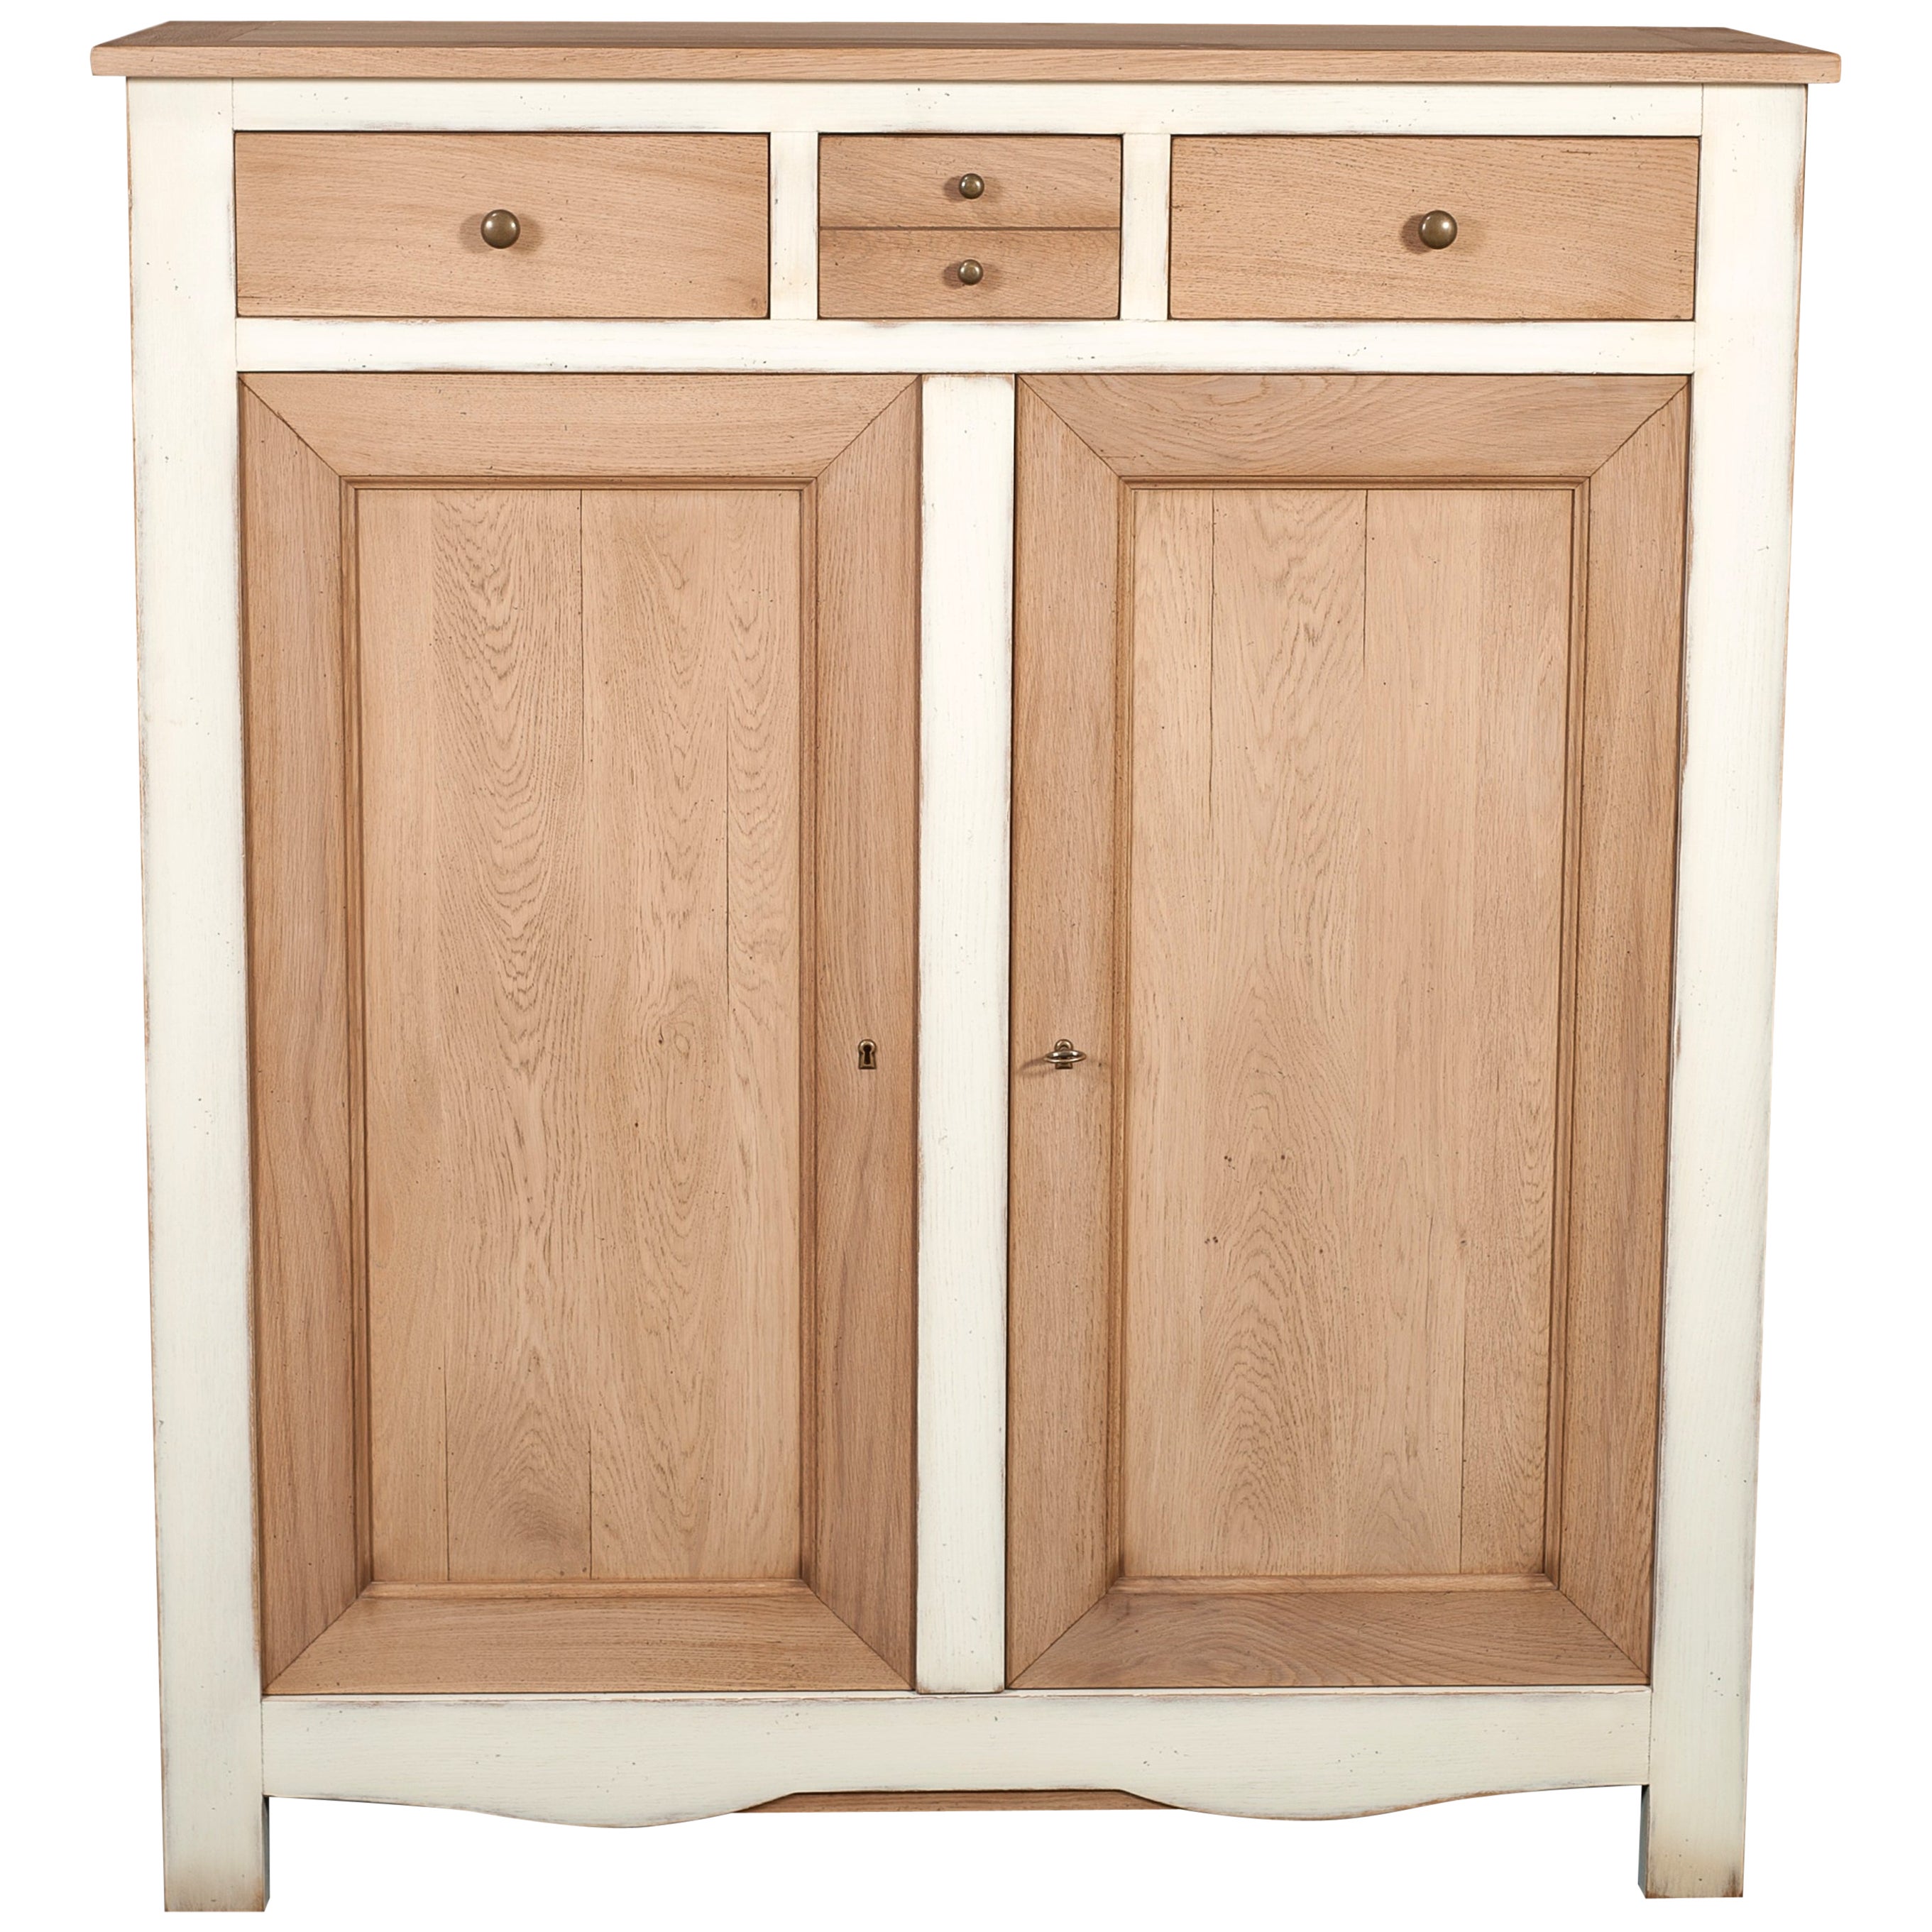 French Handcrafted Cabinet in Solid Oak, Chestnut Oak Stained, Satin Polished